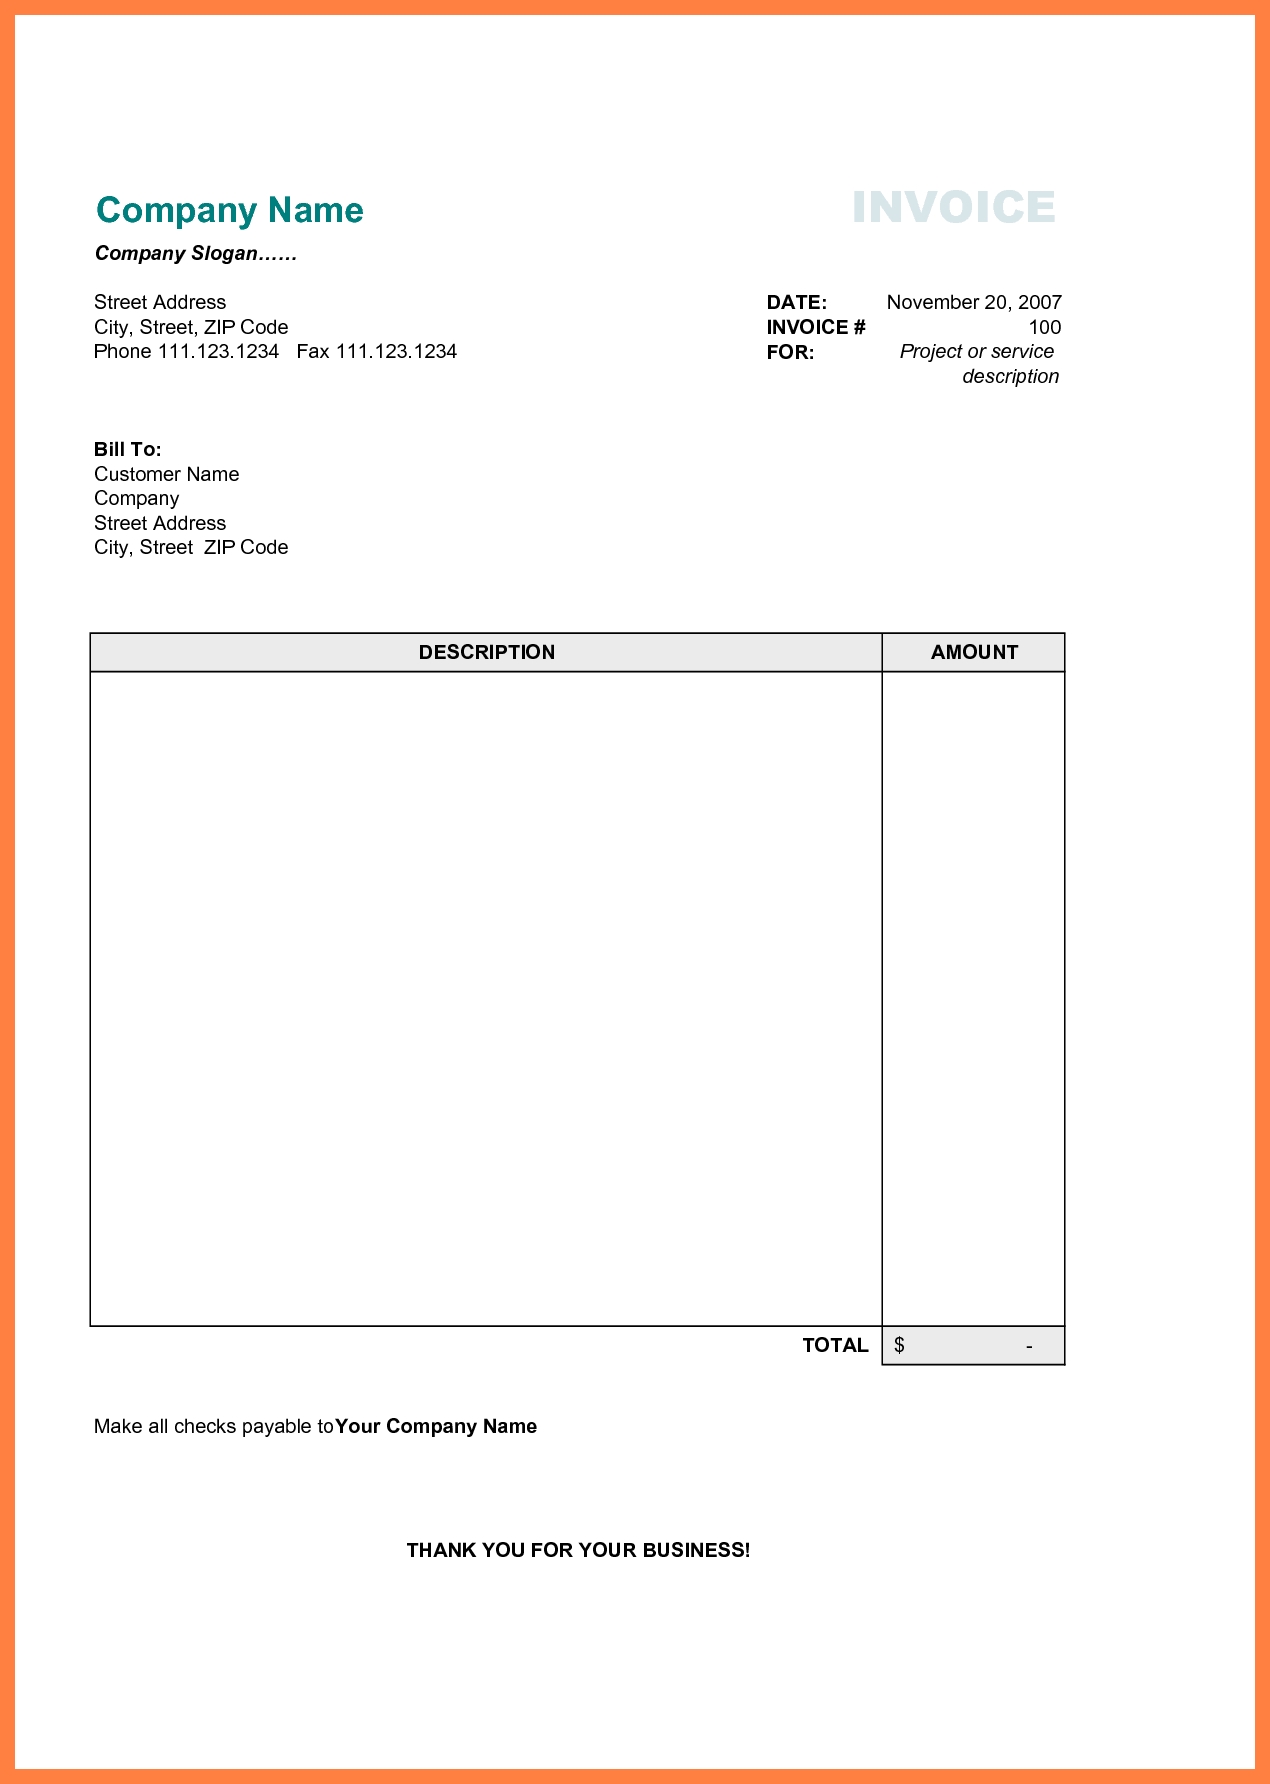 free printable business invoice template invoice format in simple blank invoice excel free